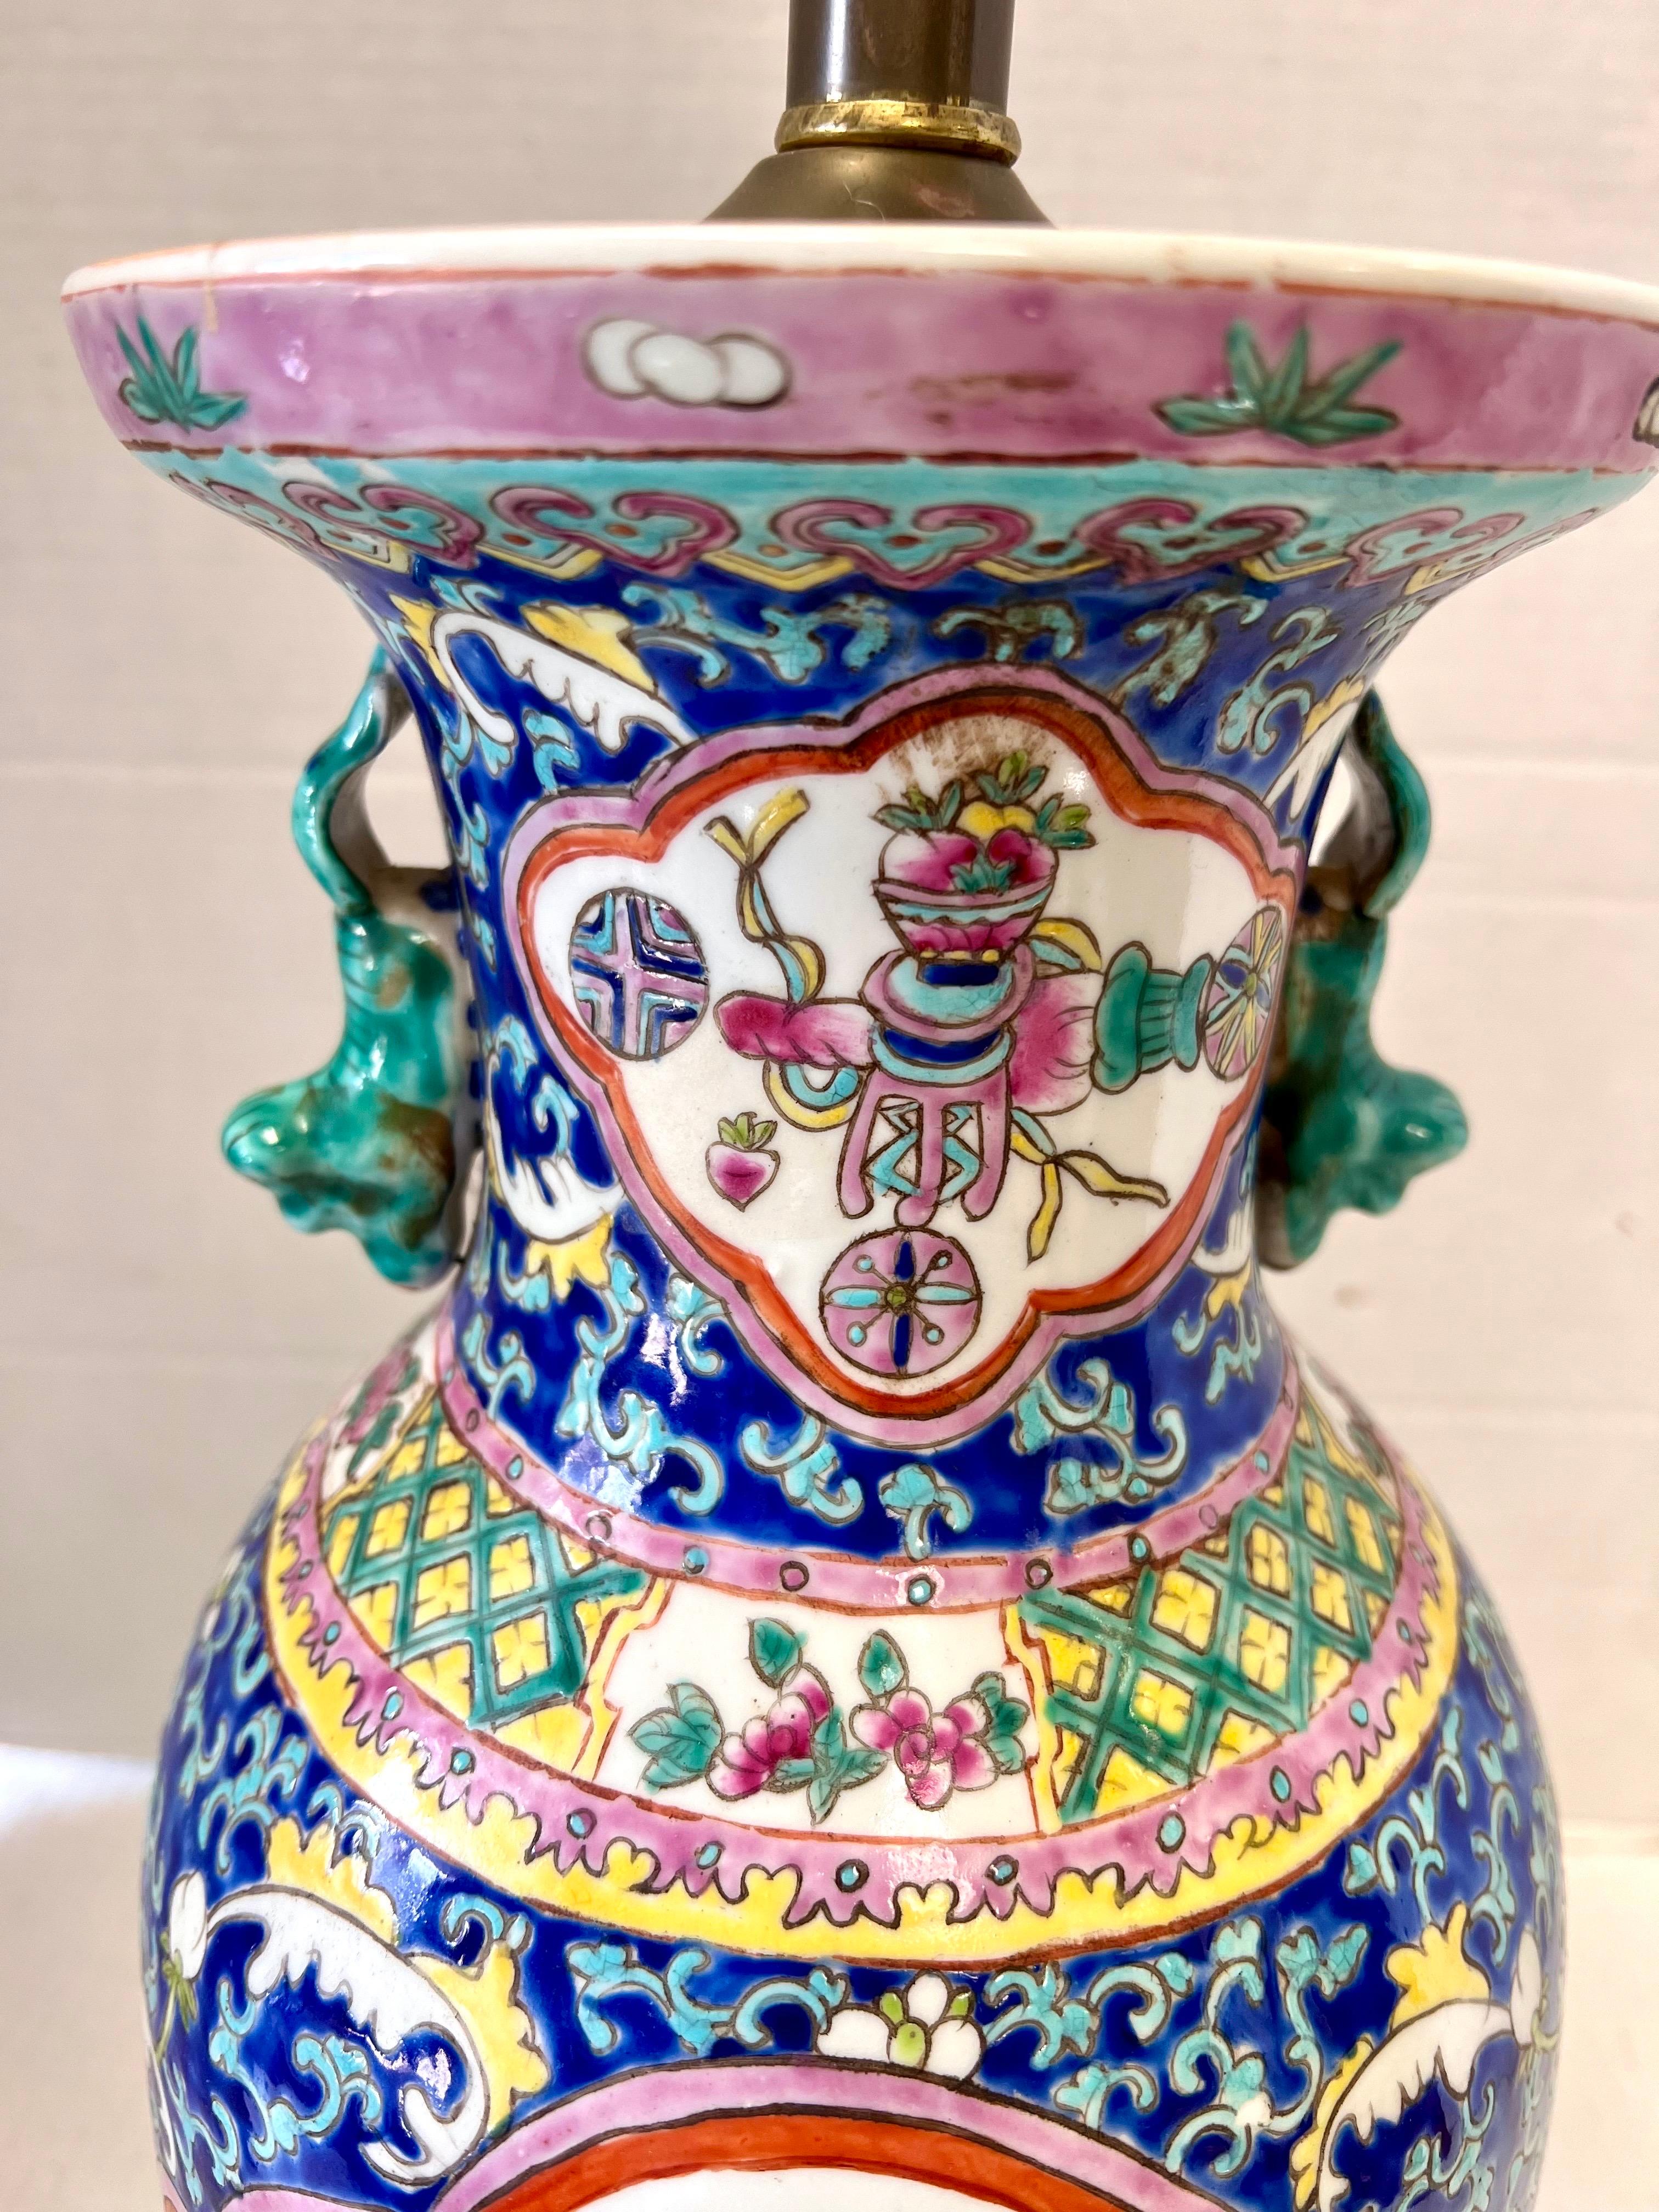 Stunning Chinese porcelain table lamp features hand painted floral motif on a blue ground with applied turquoise foo dog handles. Wired for US and in working order. Comes as shown with no shade or harp.